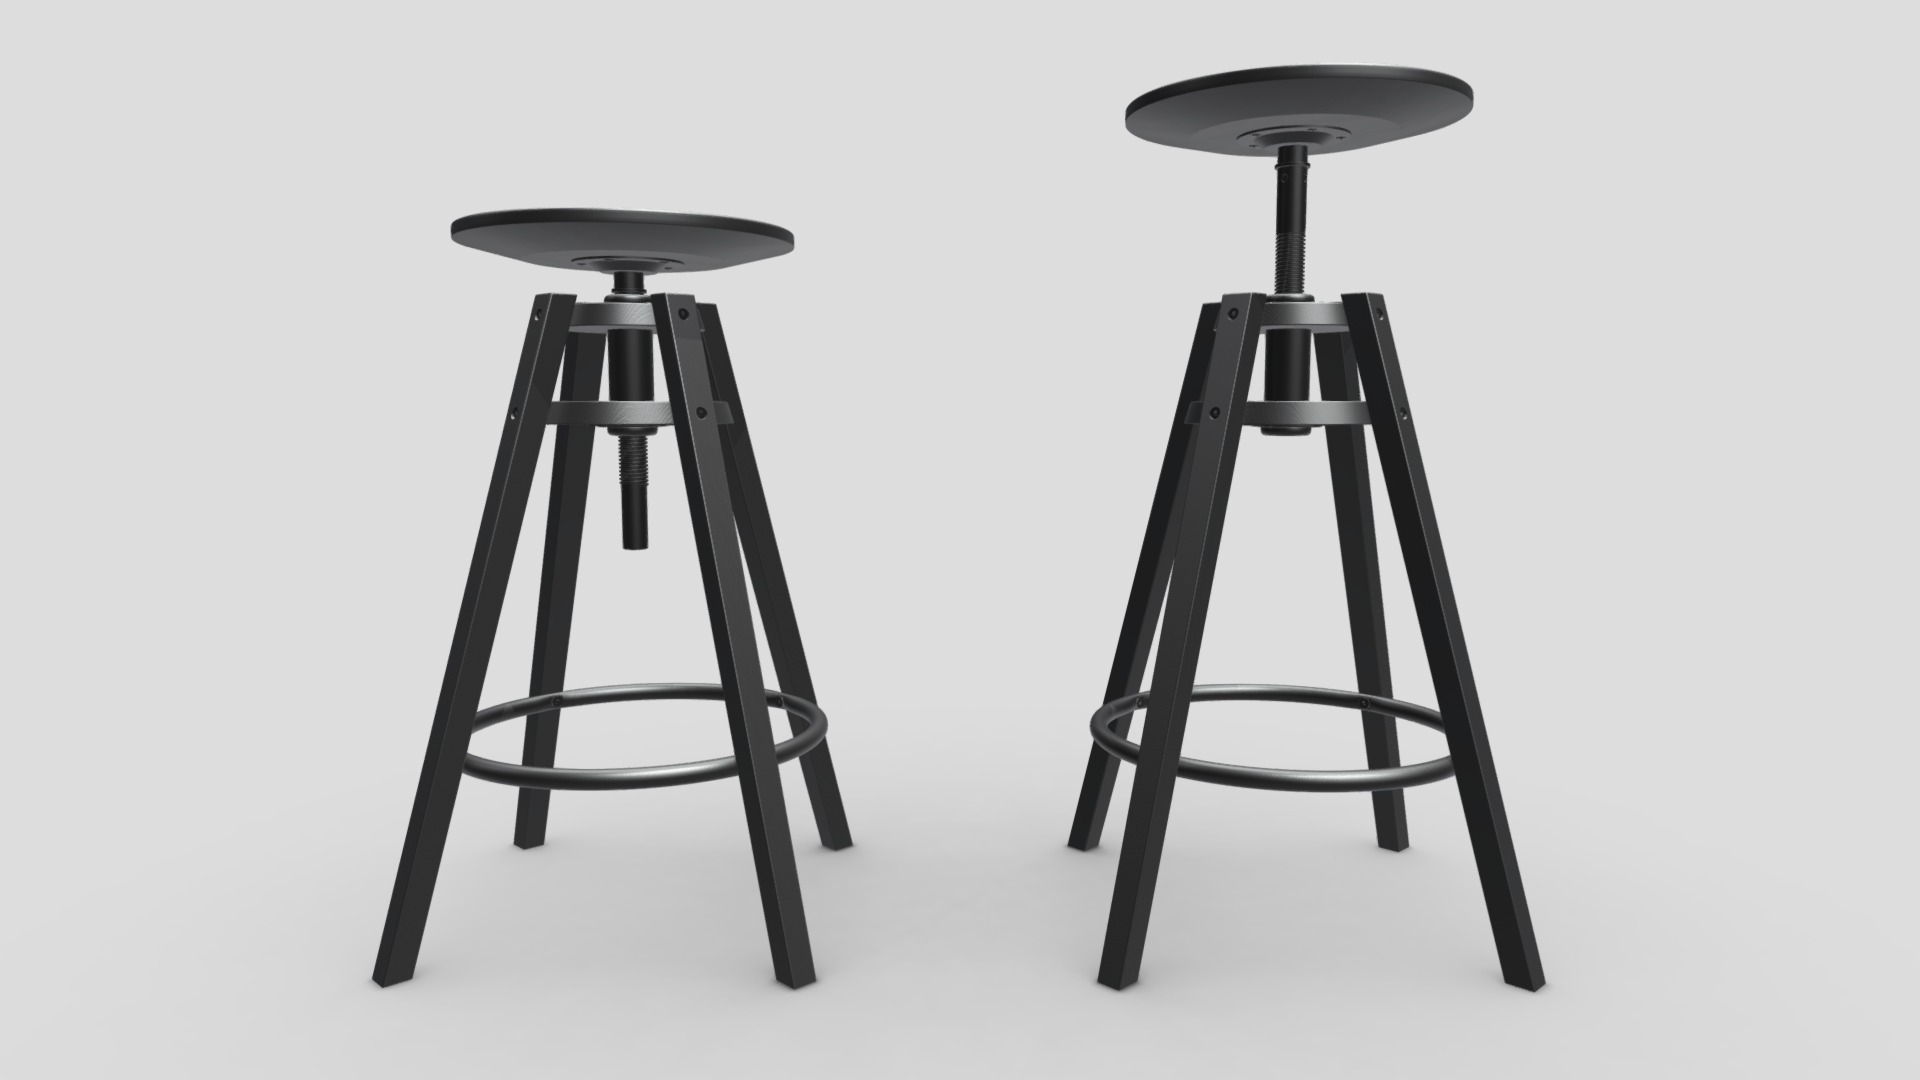 3D model Hoker Ikea Dalfred - This is a 3D model of the Hoker Ikea Dalfred. The 3D model is about a set of stools.